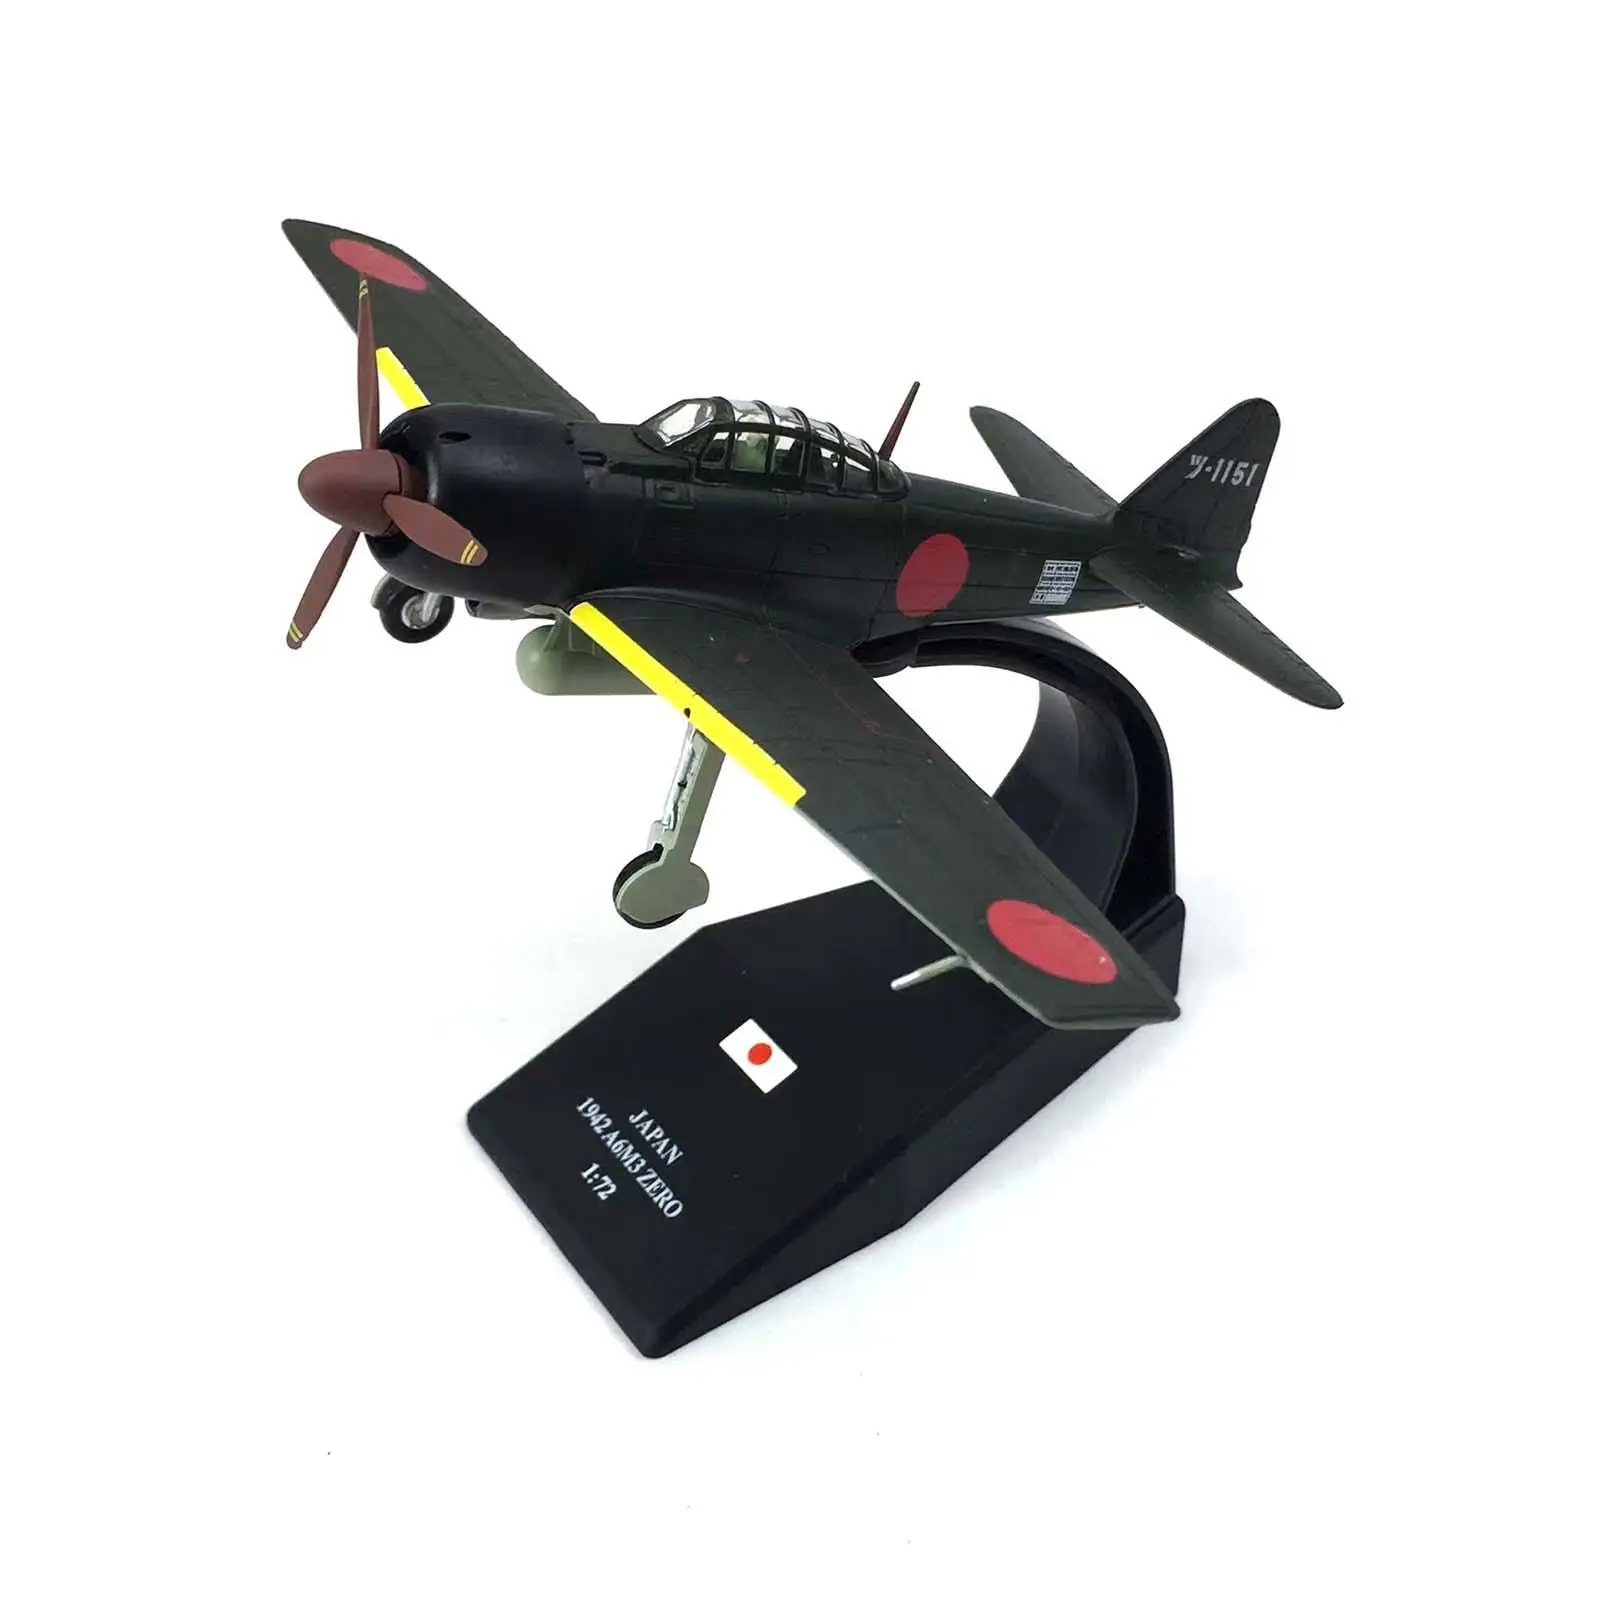 1:72 Static Aviation Airplane Metal Toys Chic Gifts Collection Decoration Durable Plane Aircraft Aviation Model for Boys Girls